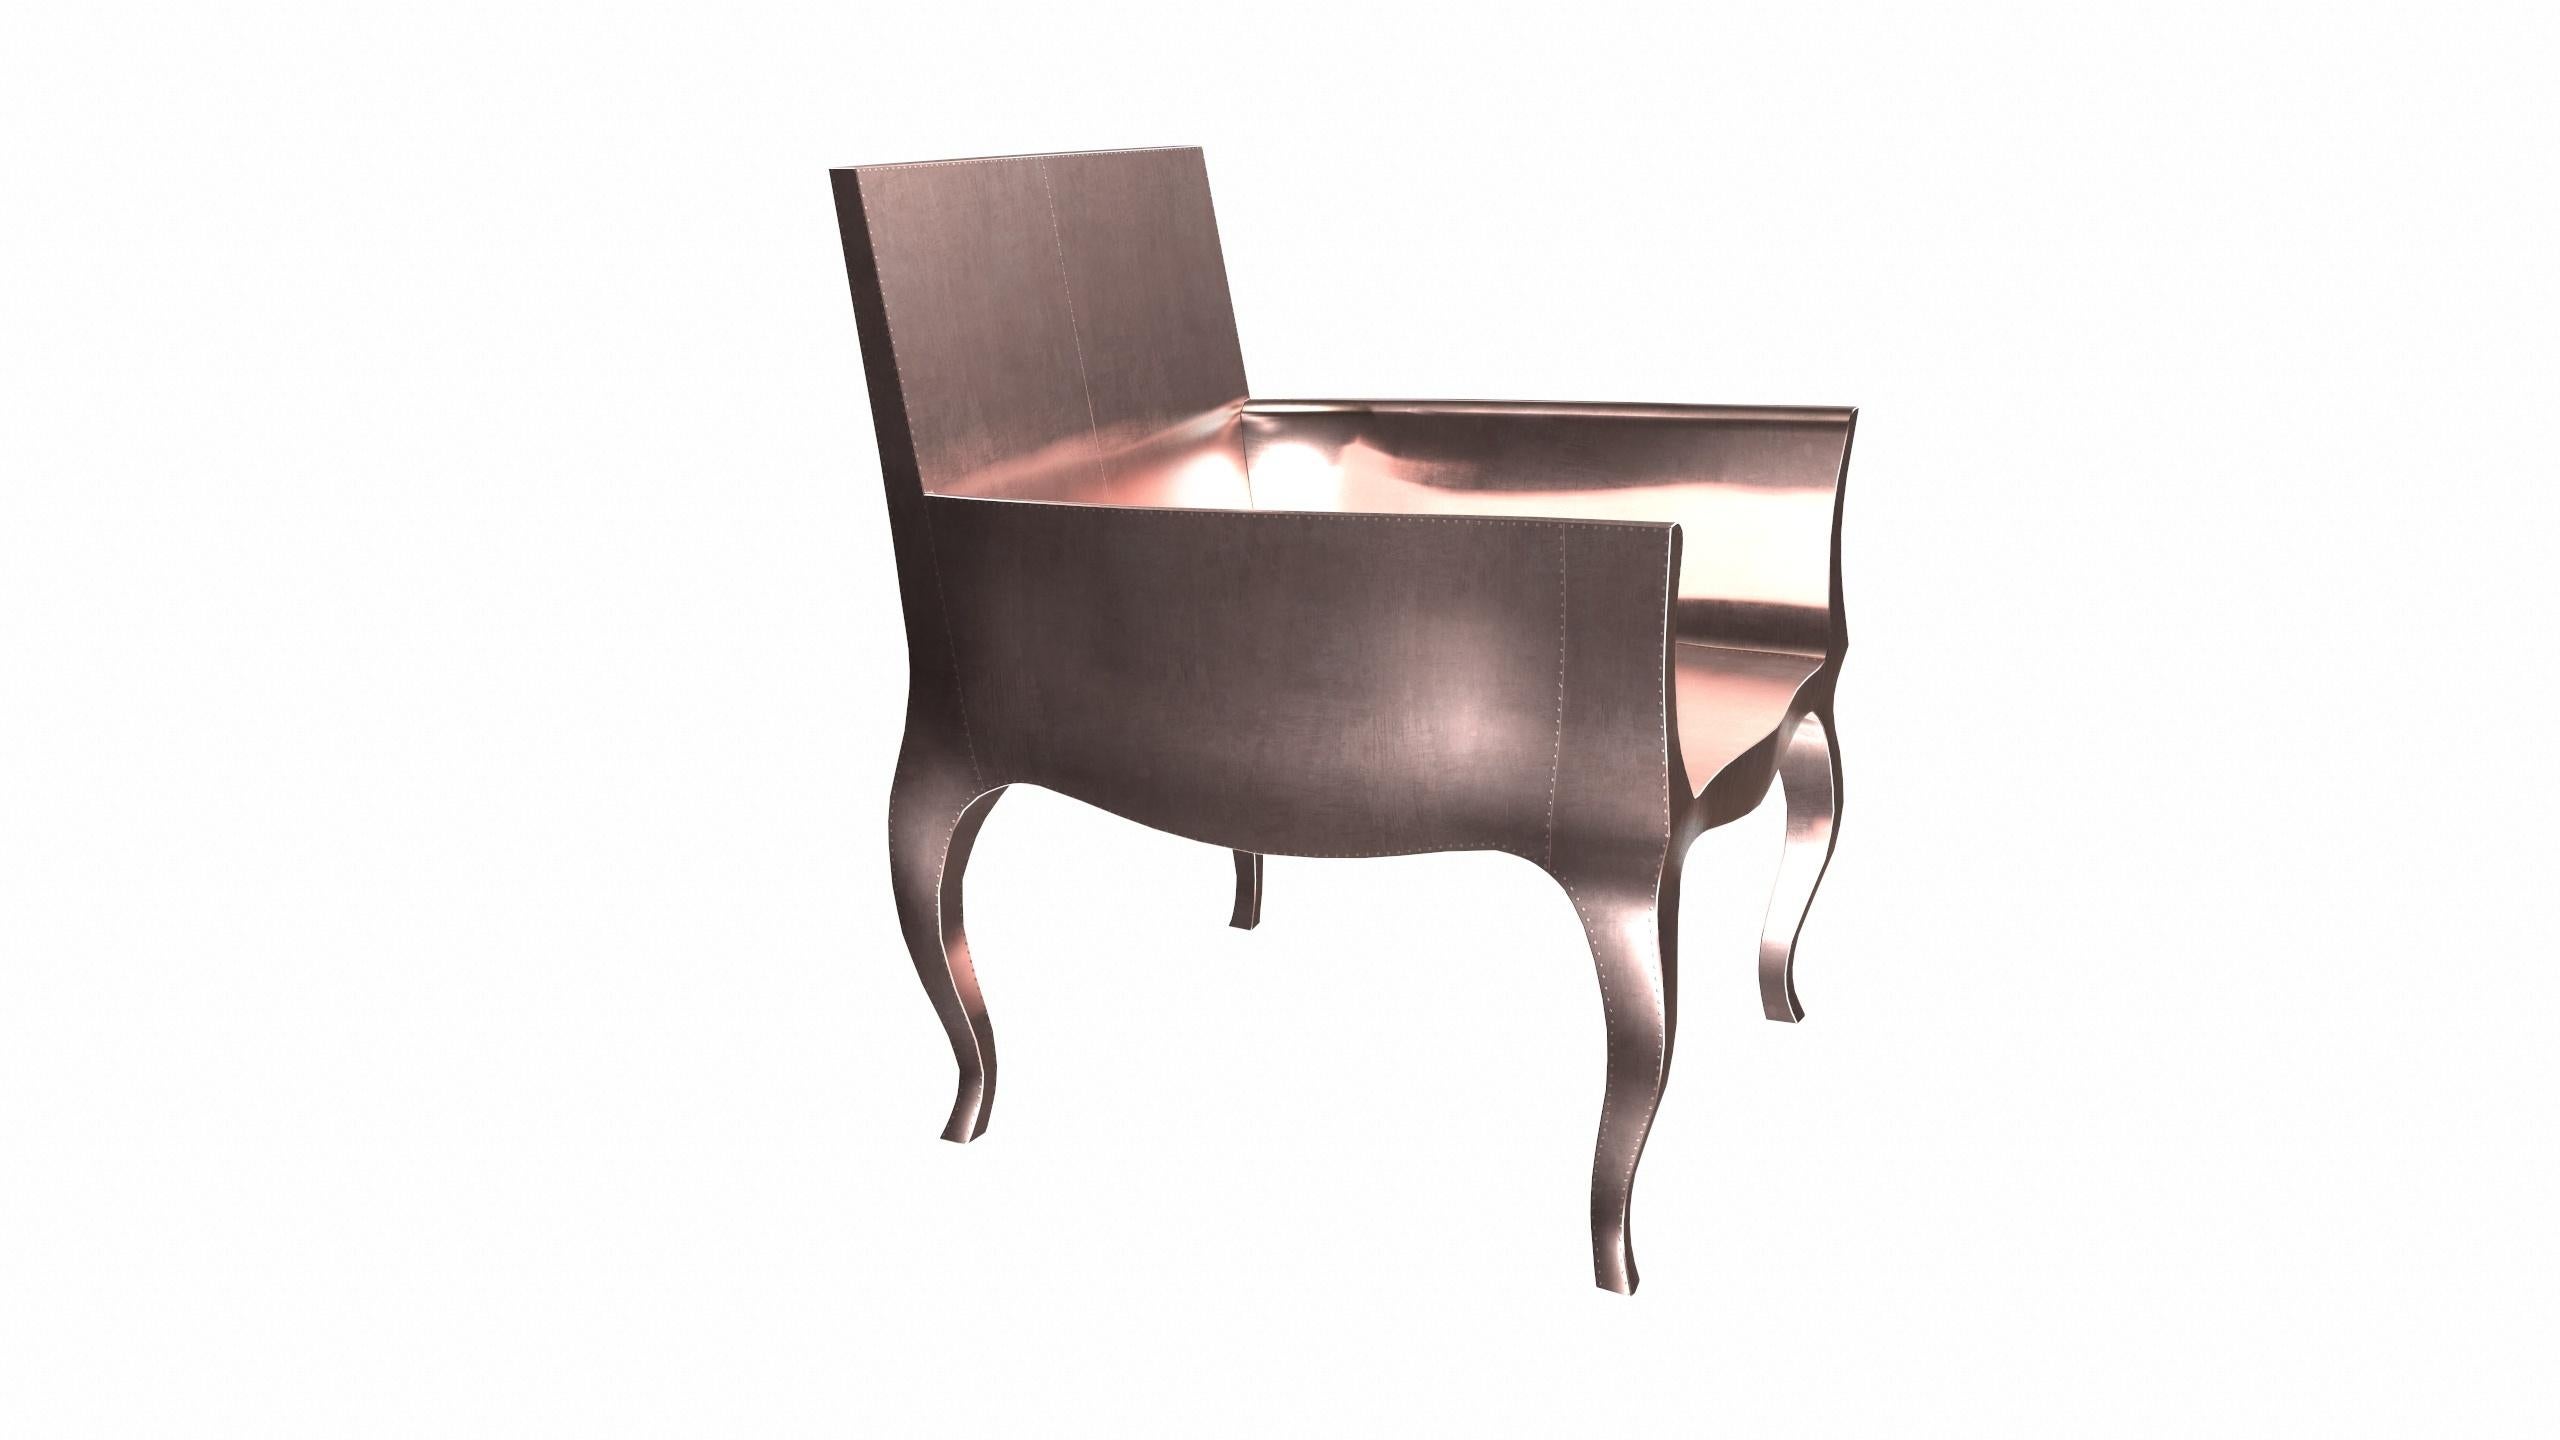 Hand-Carved Deco Chairs in Smooth Copper by Paul Mathieu for S. Odegard For Sale